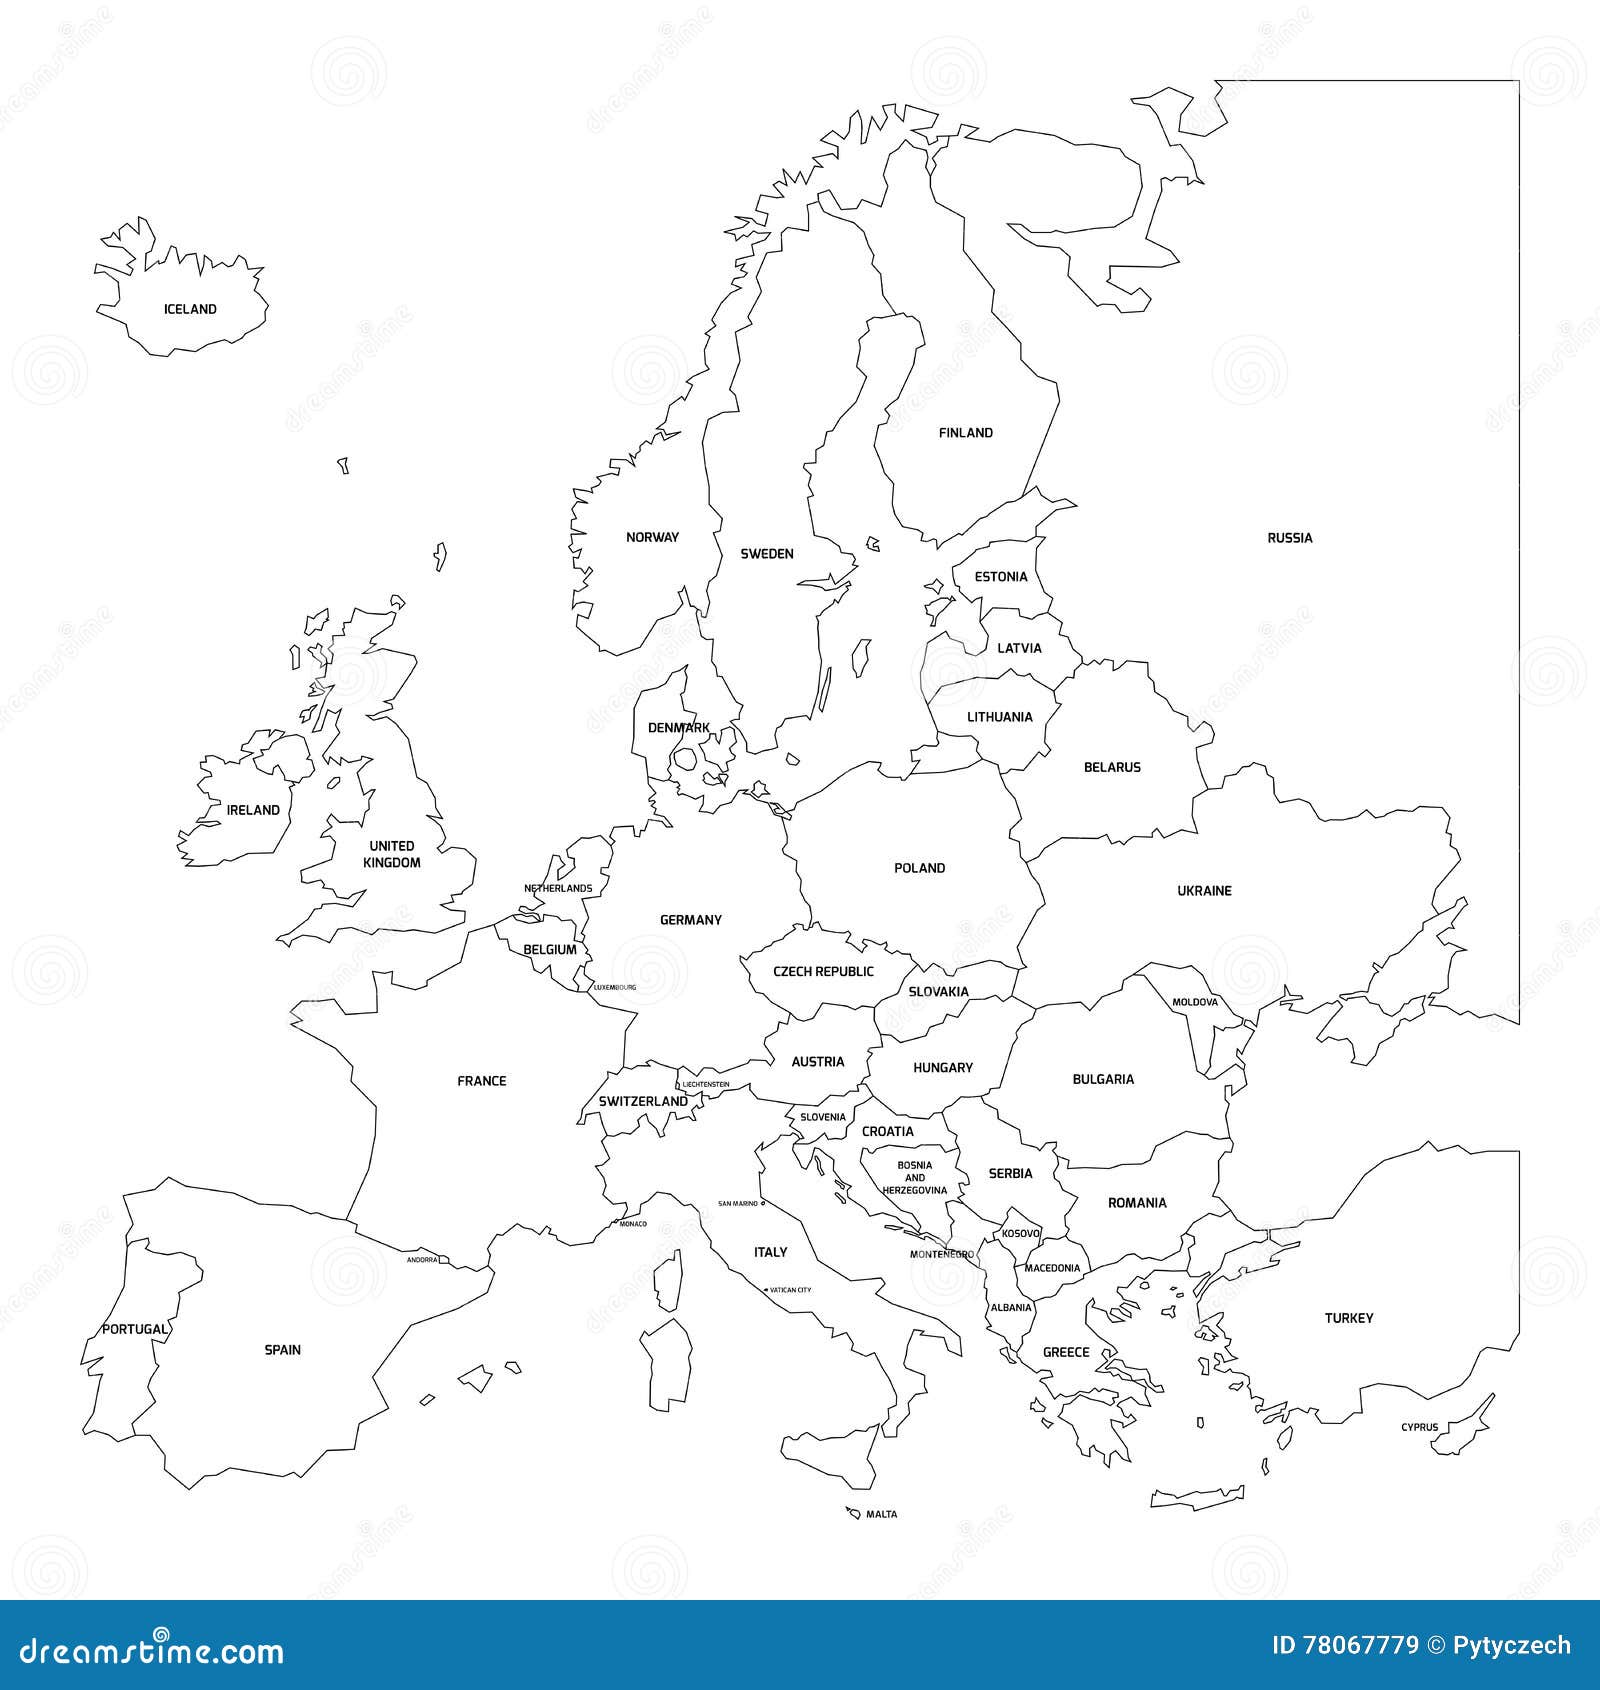 Outline Map Of Europe Stock Vector Illustration Of Euro 78067779